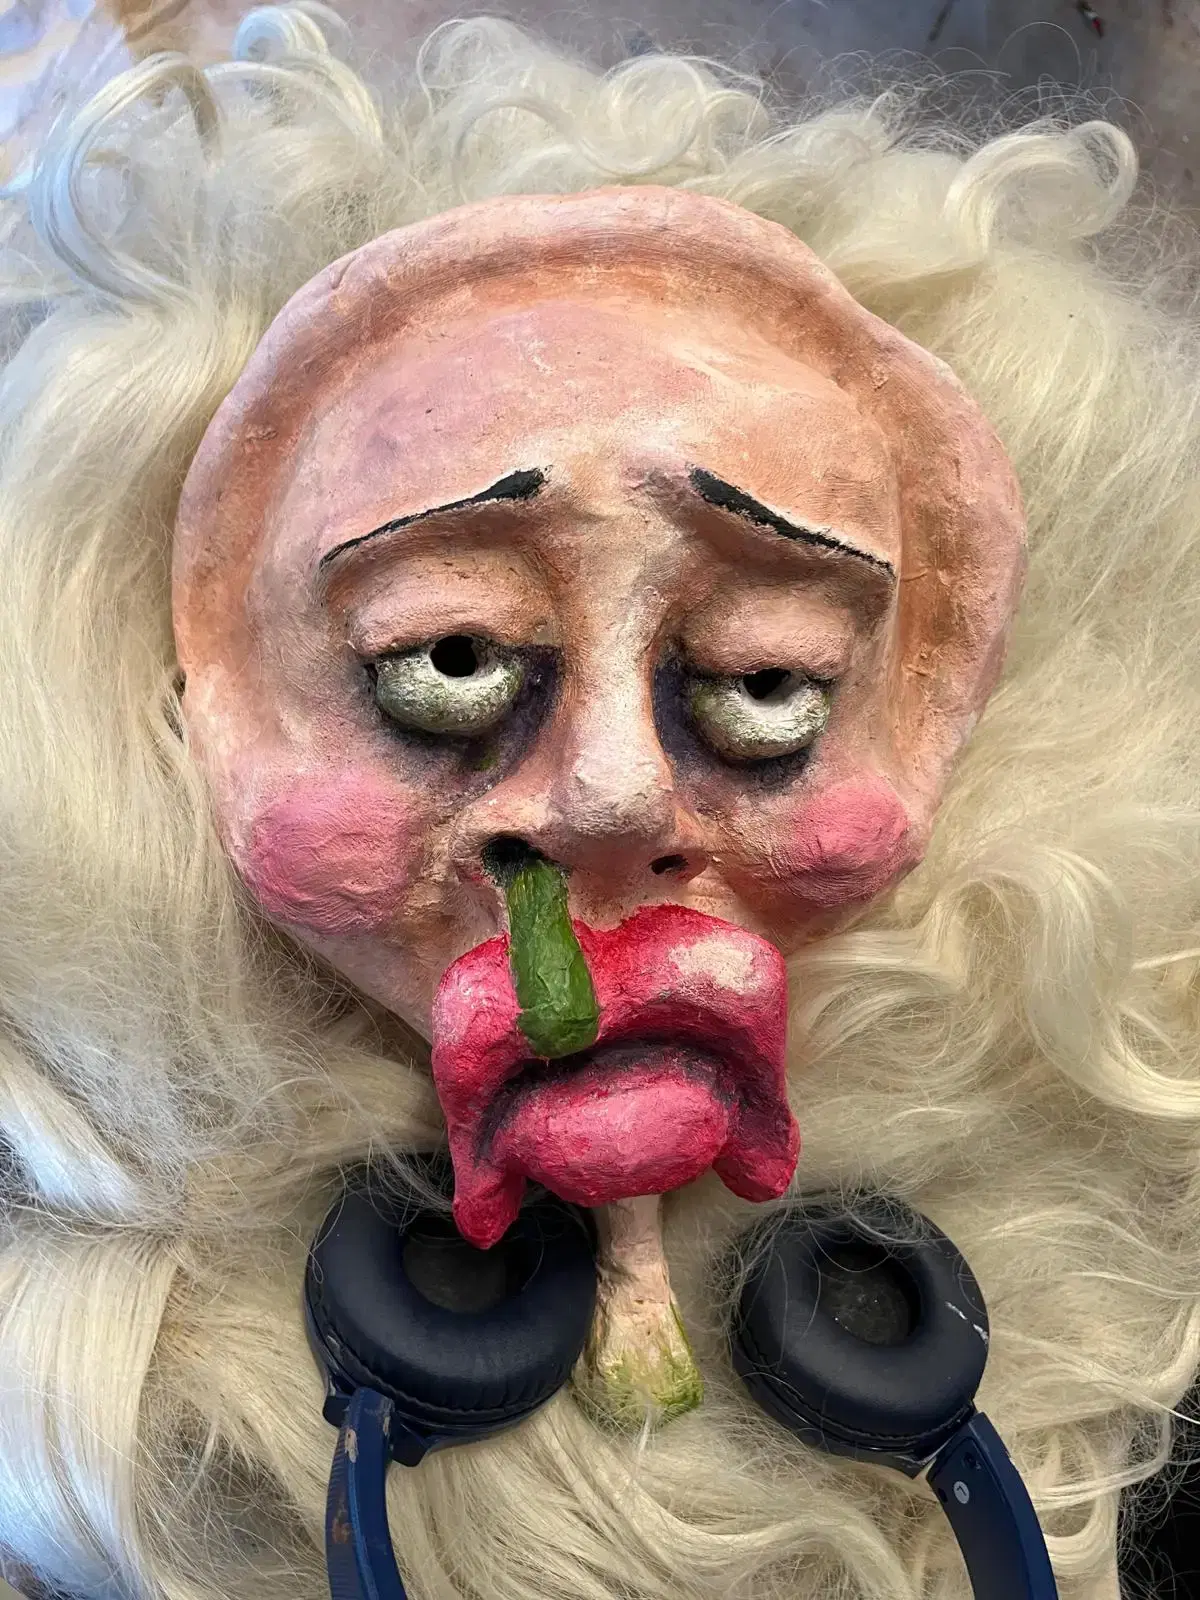 An image of a theatrical mask with exaggerated features, including a large red nose, puffy cheeks, and long white hair, comically and dramatically sticking out its tongue with a green chili pepper positioned on it. headphones rest around the neck of the mask, adding a modern touch to this otherwise classic representation of clown-like expression.